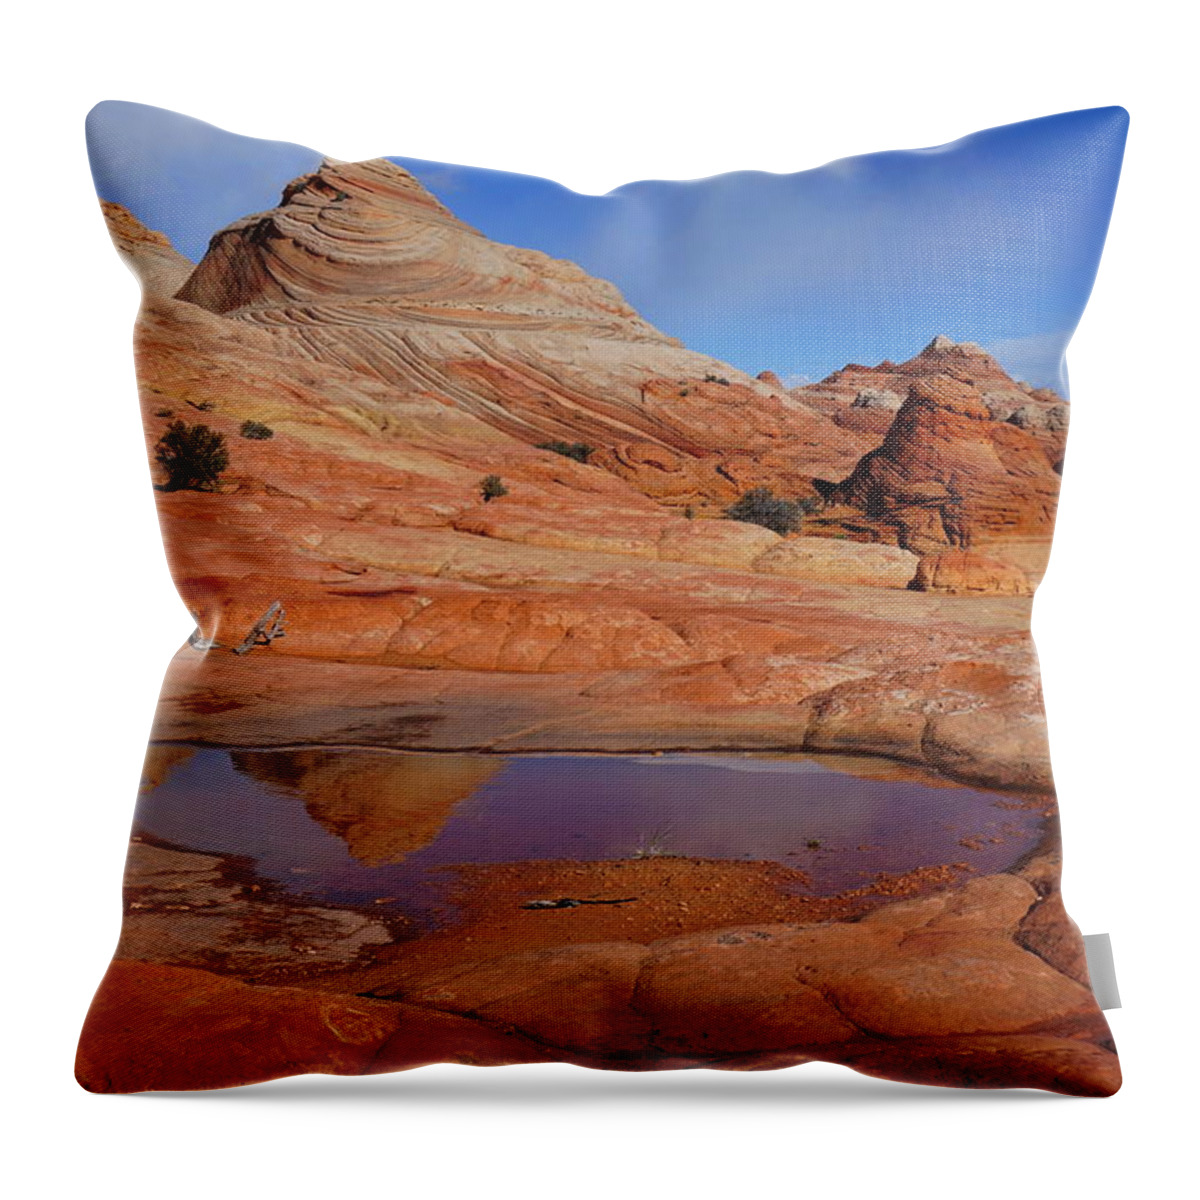 Coyote Throw Pillow featuring the photograph Coyote Butte Reflection by Tranquil Light Photography